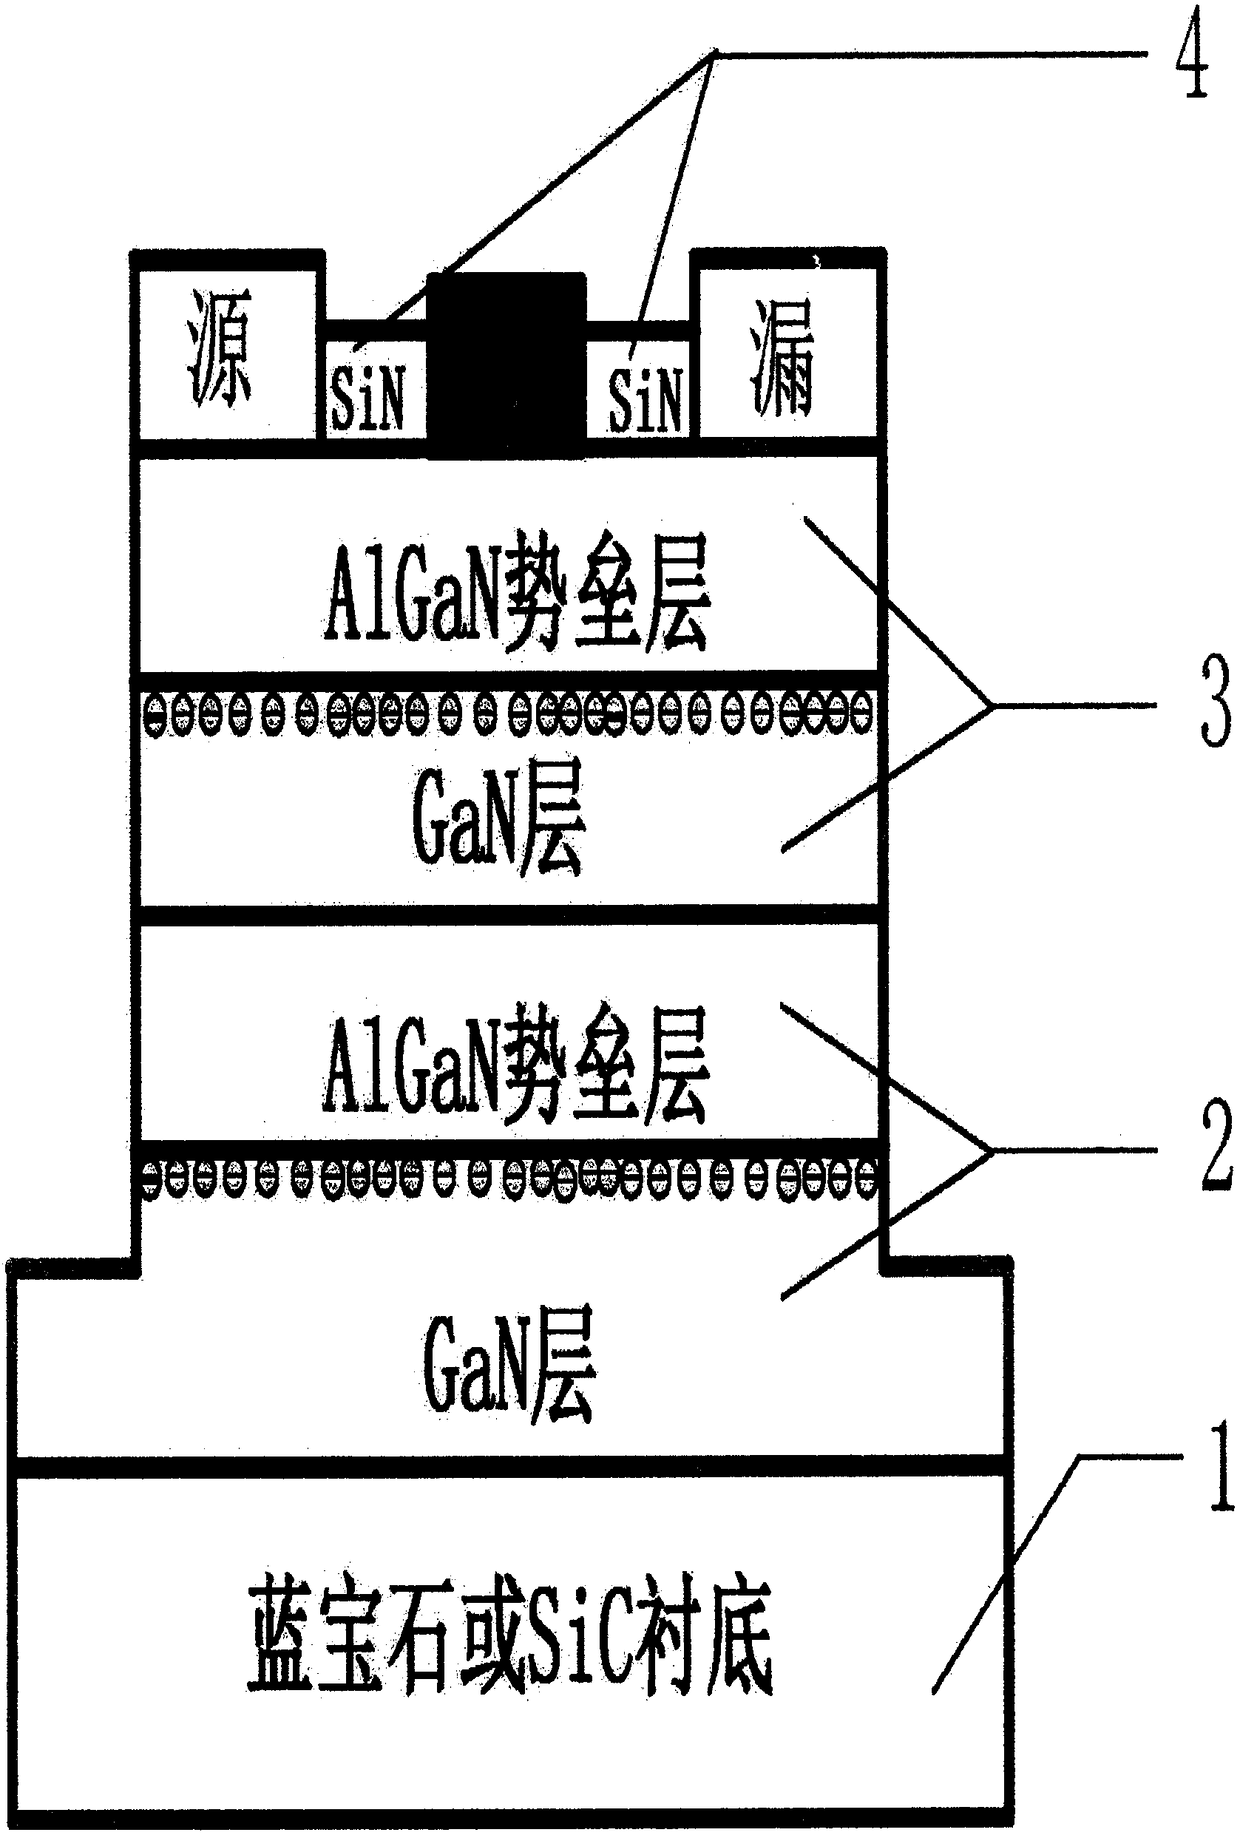 AlGaN/GaN high electron mobility transistor with multi-channel fin-type structure